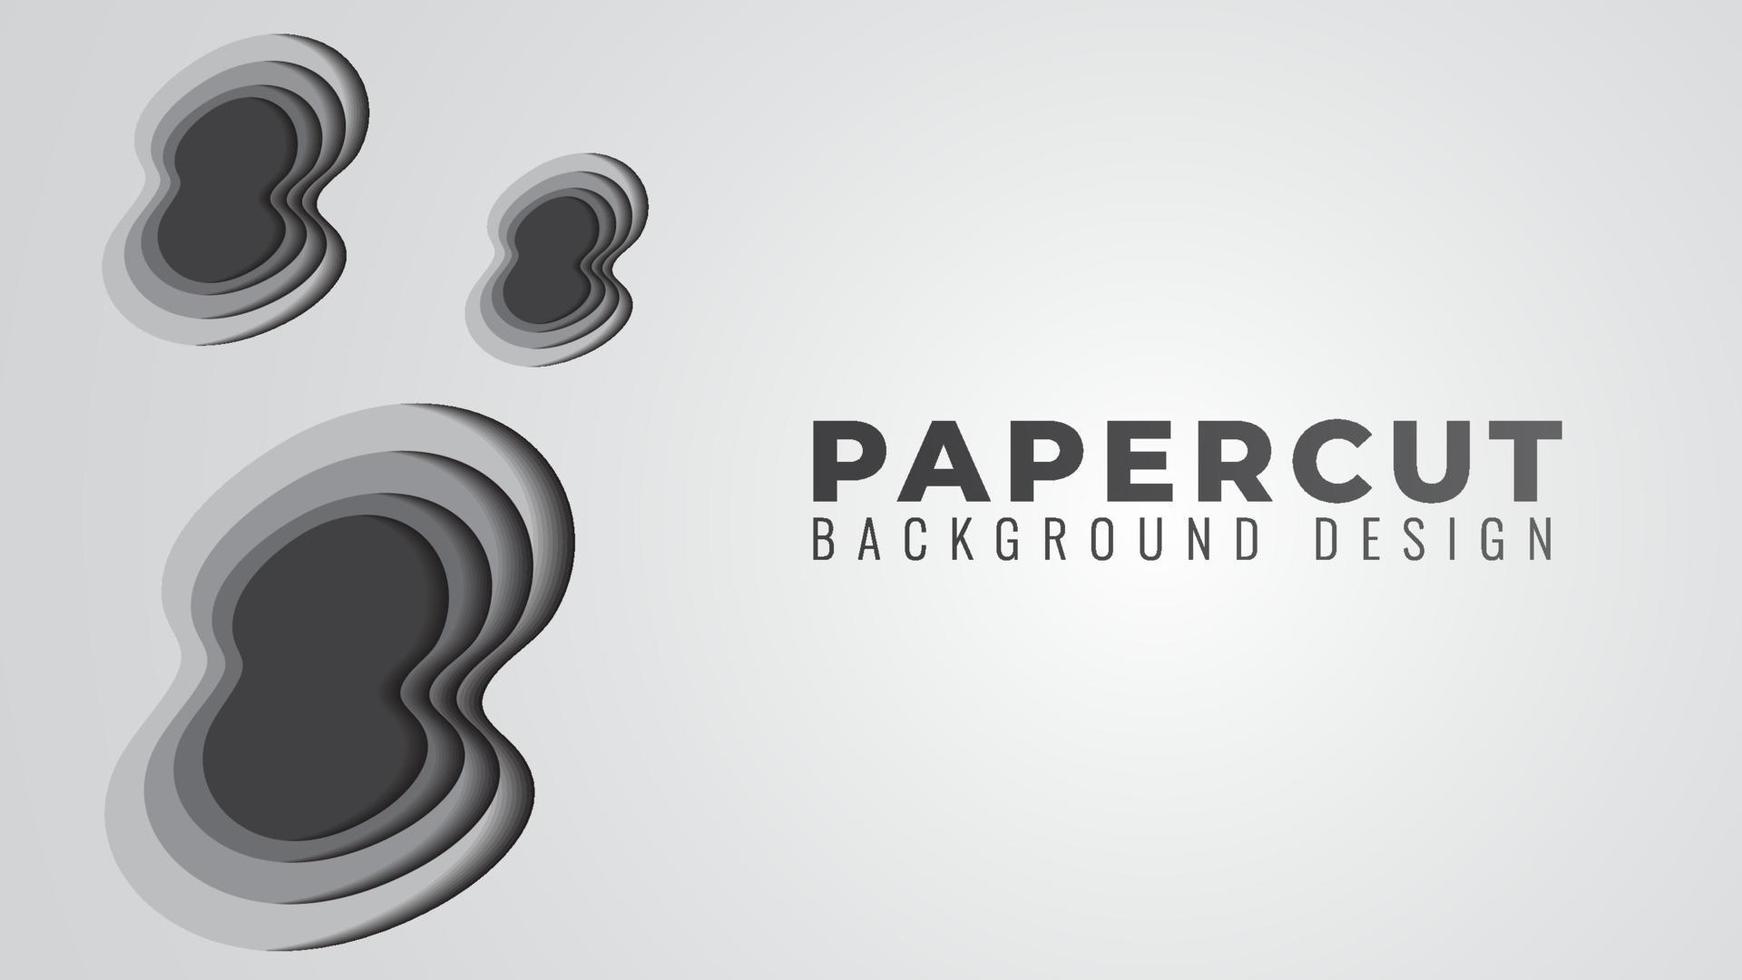 Monochrome Papercut Layers Vector Illustration. Abstract Background Design Template. Gray Color Theme. Simple and Clean Design Style